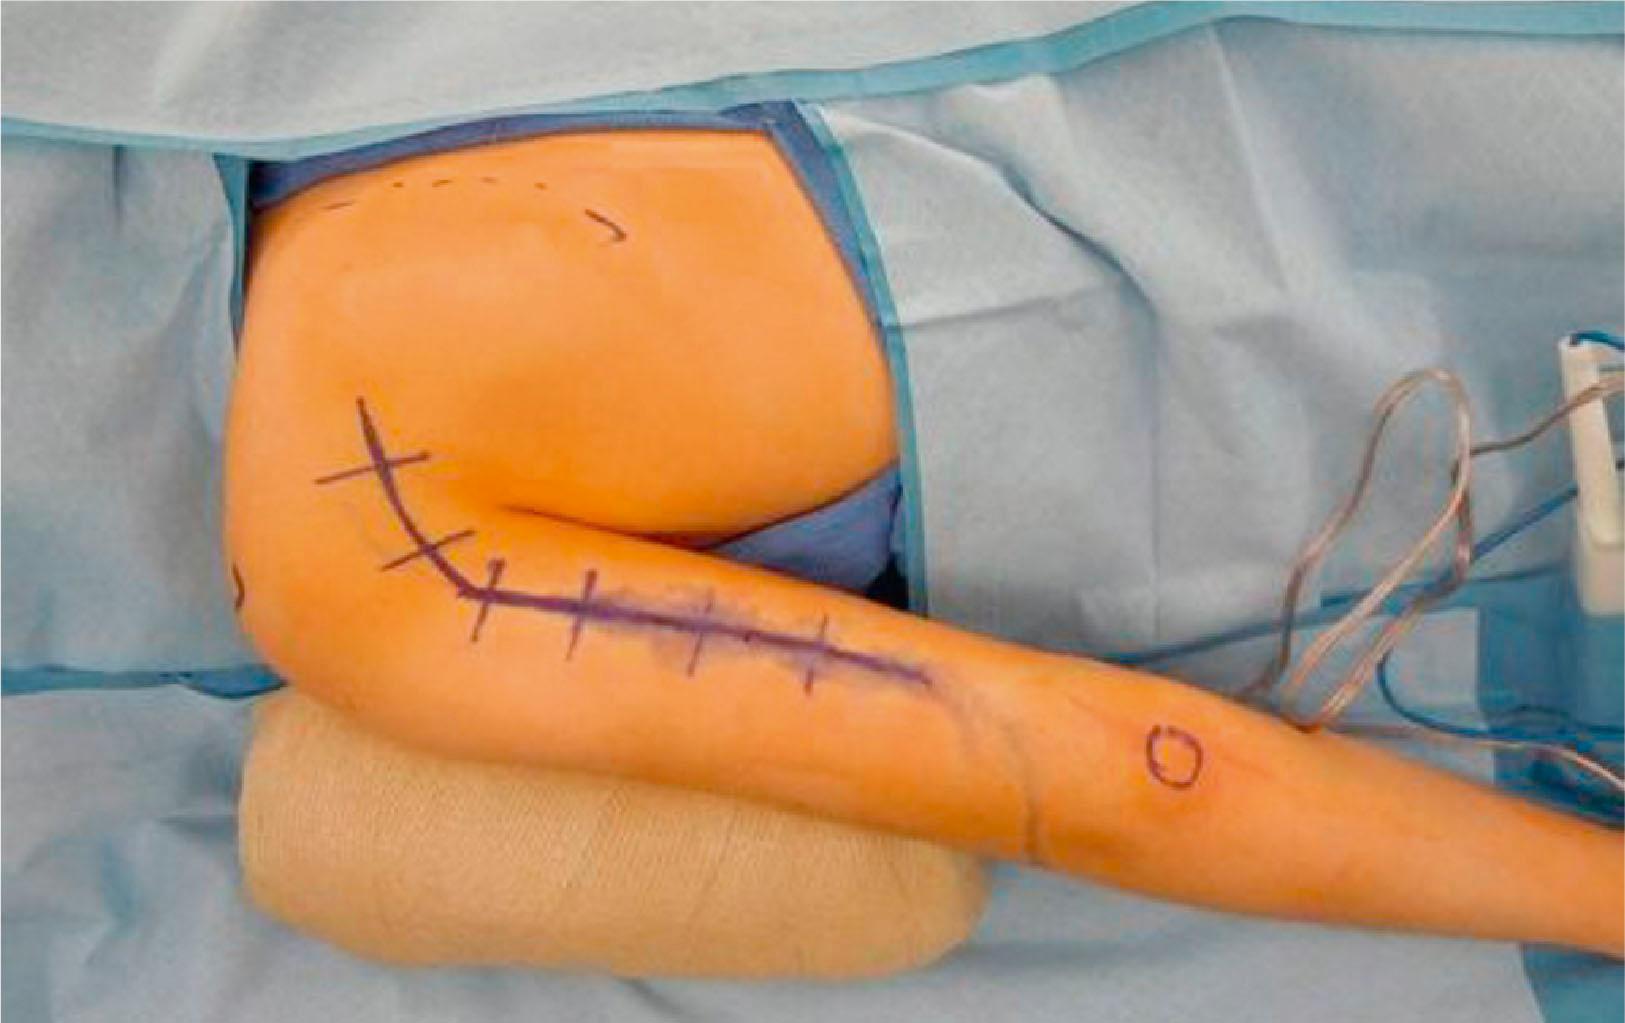 Figure 26.7, Set-up and incision for triceps to axillary. The patient is positioned in the prone position and draped with the entire extremity free and the medial border of the scapula exposed. A line connecting the olecranon and the acromion is drawn on the posterior aspect of the arm and then extended in a curvilinear fashion just above the posterior axillary fold. Positioning is facilitated by placing a “bump” beneath the anterior shoulder preventing internal rotation and anterior subluxation. The arm is draped free so that distal function can be assessed with intraoperative nerve stimulation.